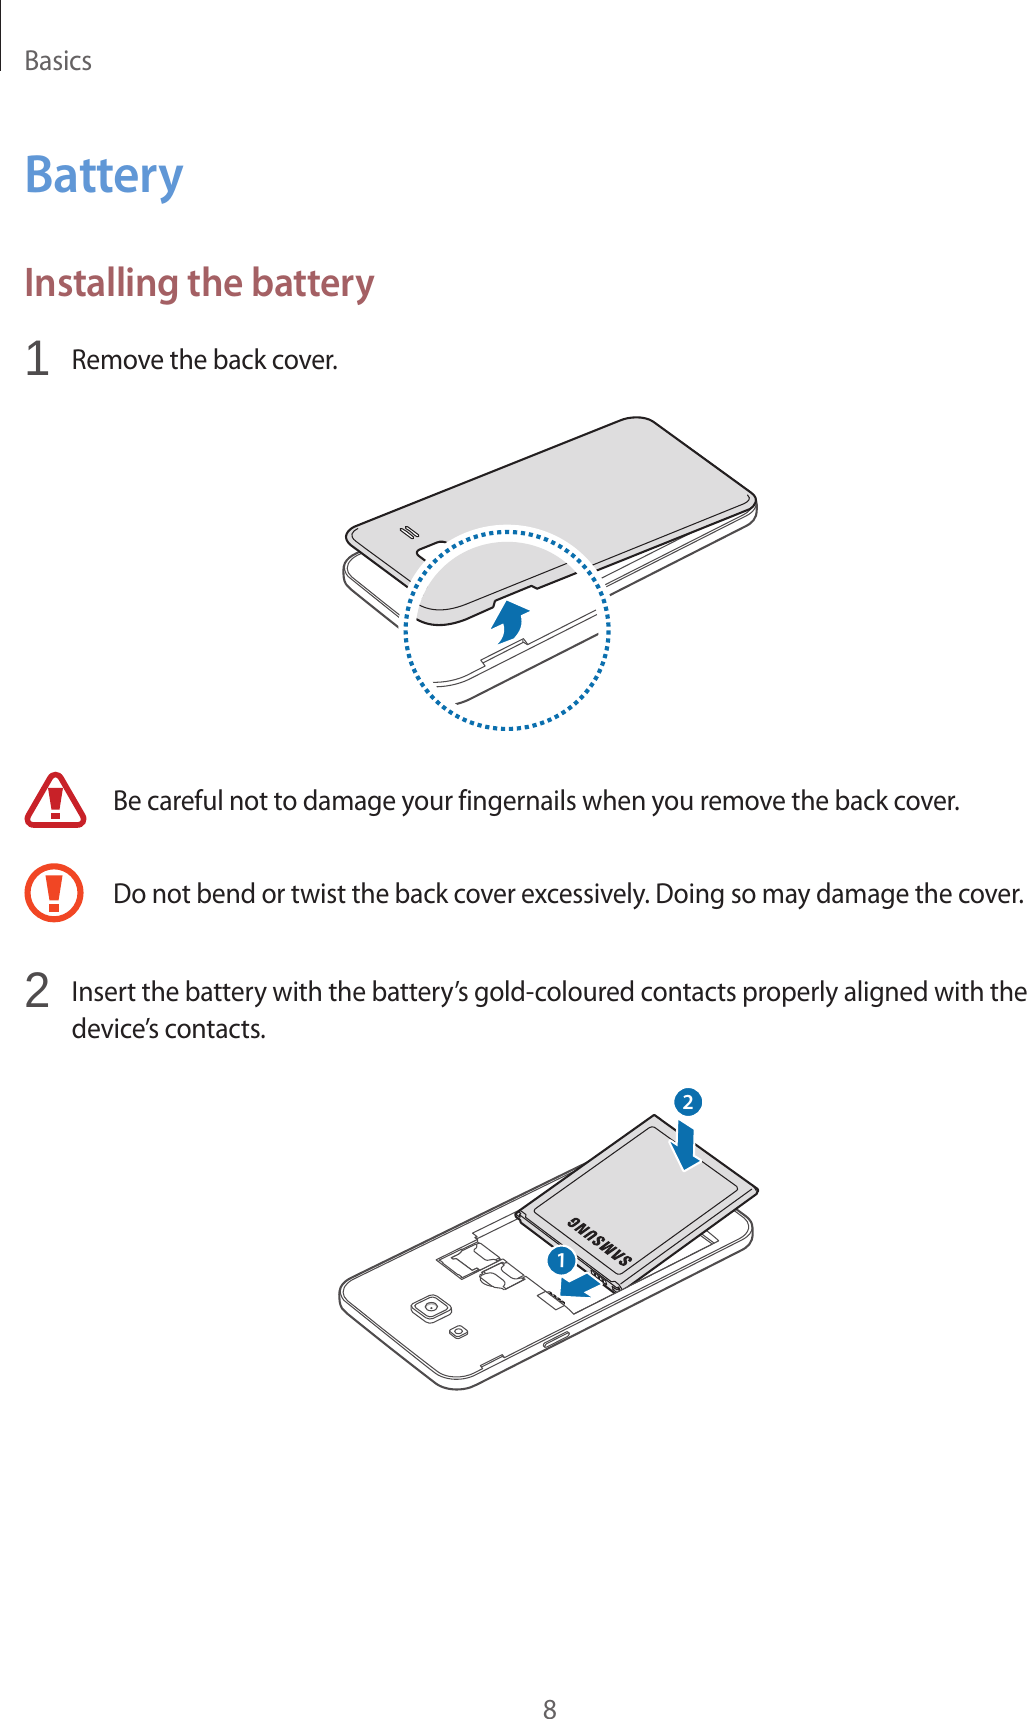 Basics8BatteryInstalling the battery1  Remove the back cover.Be careful not to damage your fingernails when you remove the back cover.Do not bend or twist the back cover excessively. Doing so may damage the cover.2  Insert the battery with the battery’s gold-coloured contacts properly aligned with the device’s contacts.12